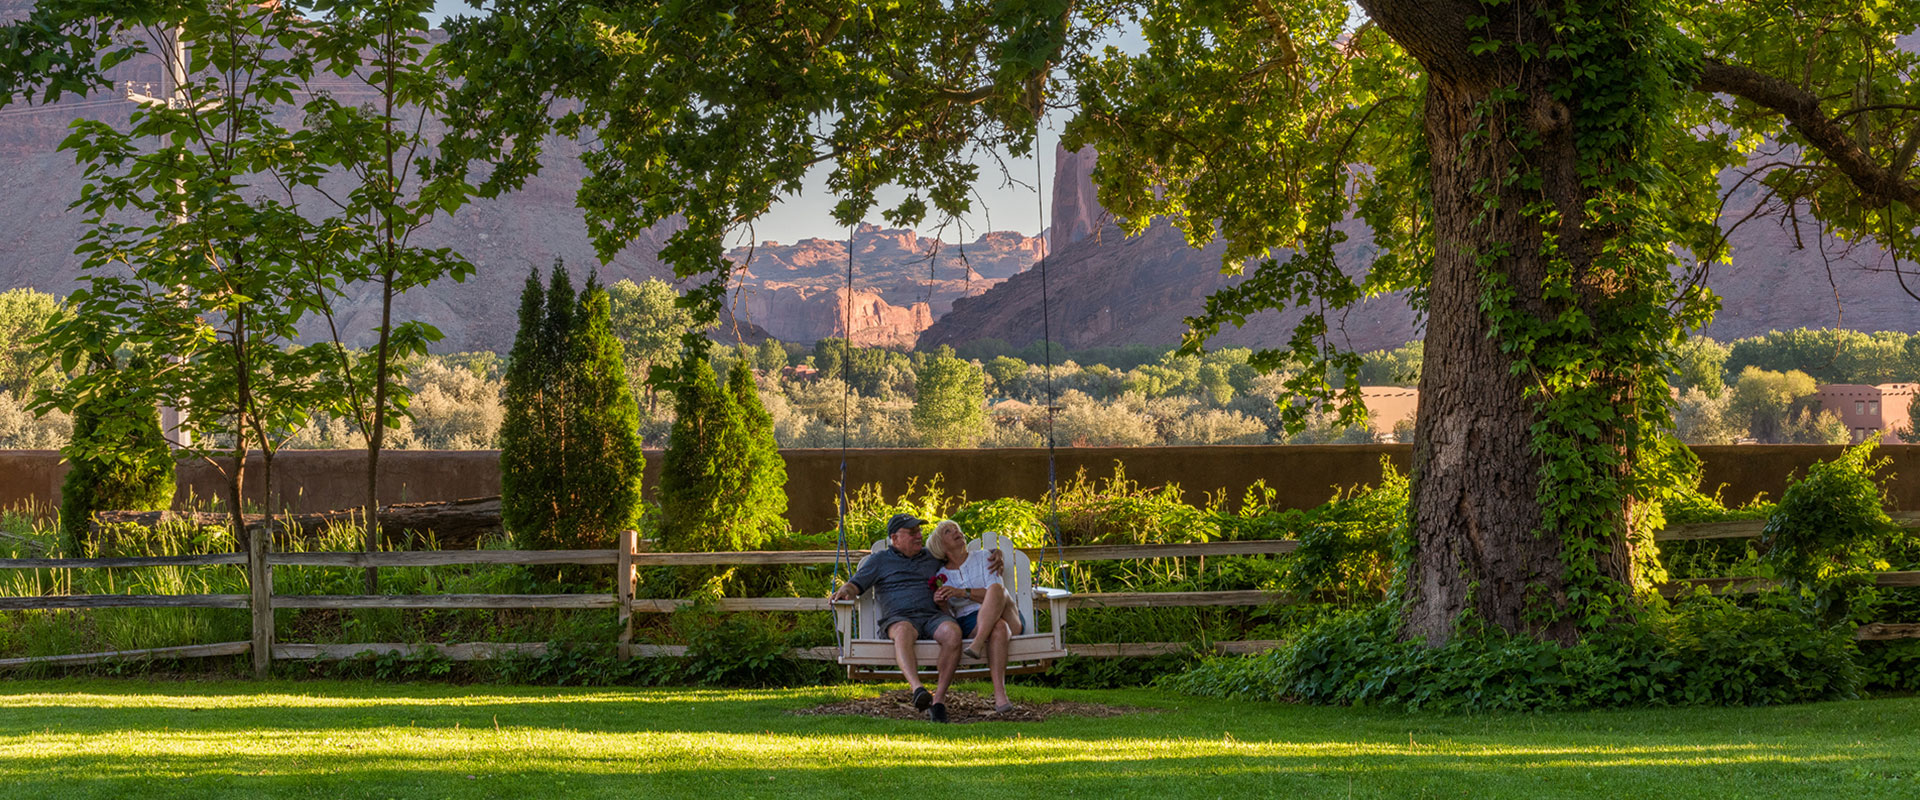 Gallery – Hotel Pictures | Moab Springs Ranch, UT